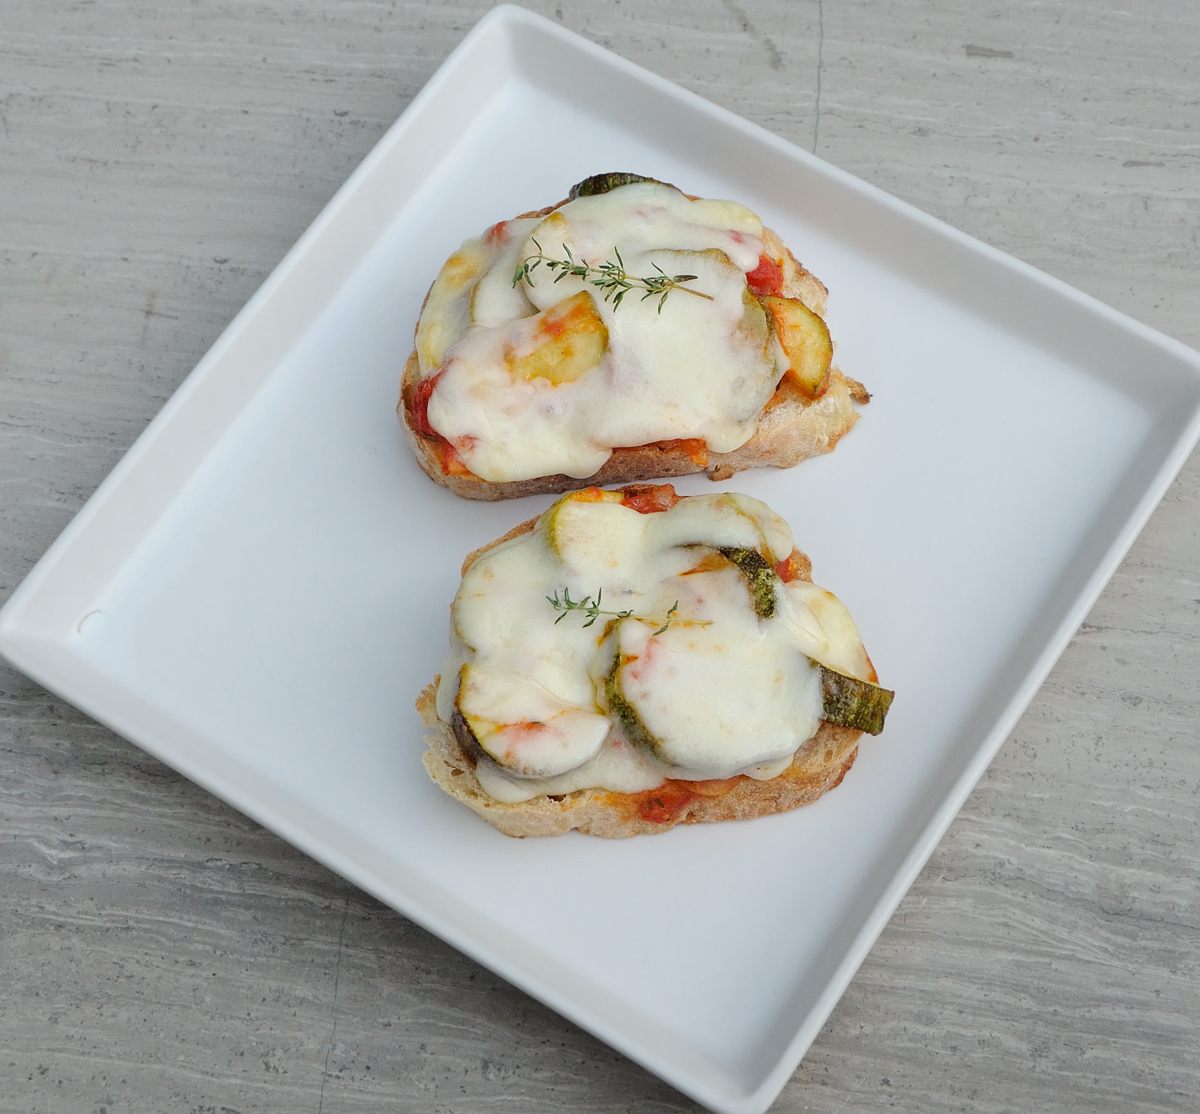 Zucchini Crostini with Melted Cheese ,Thyme Sprigs Garnish